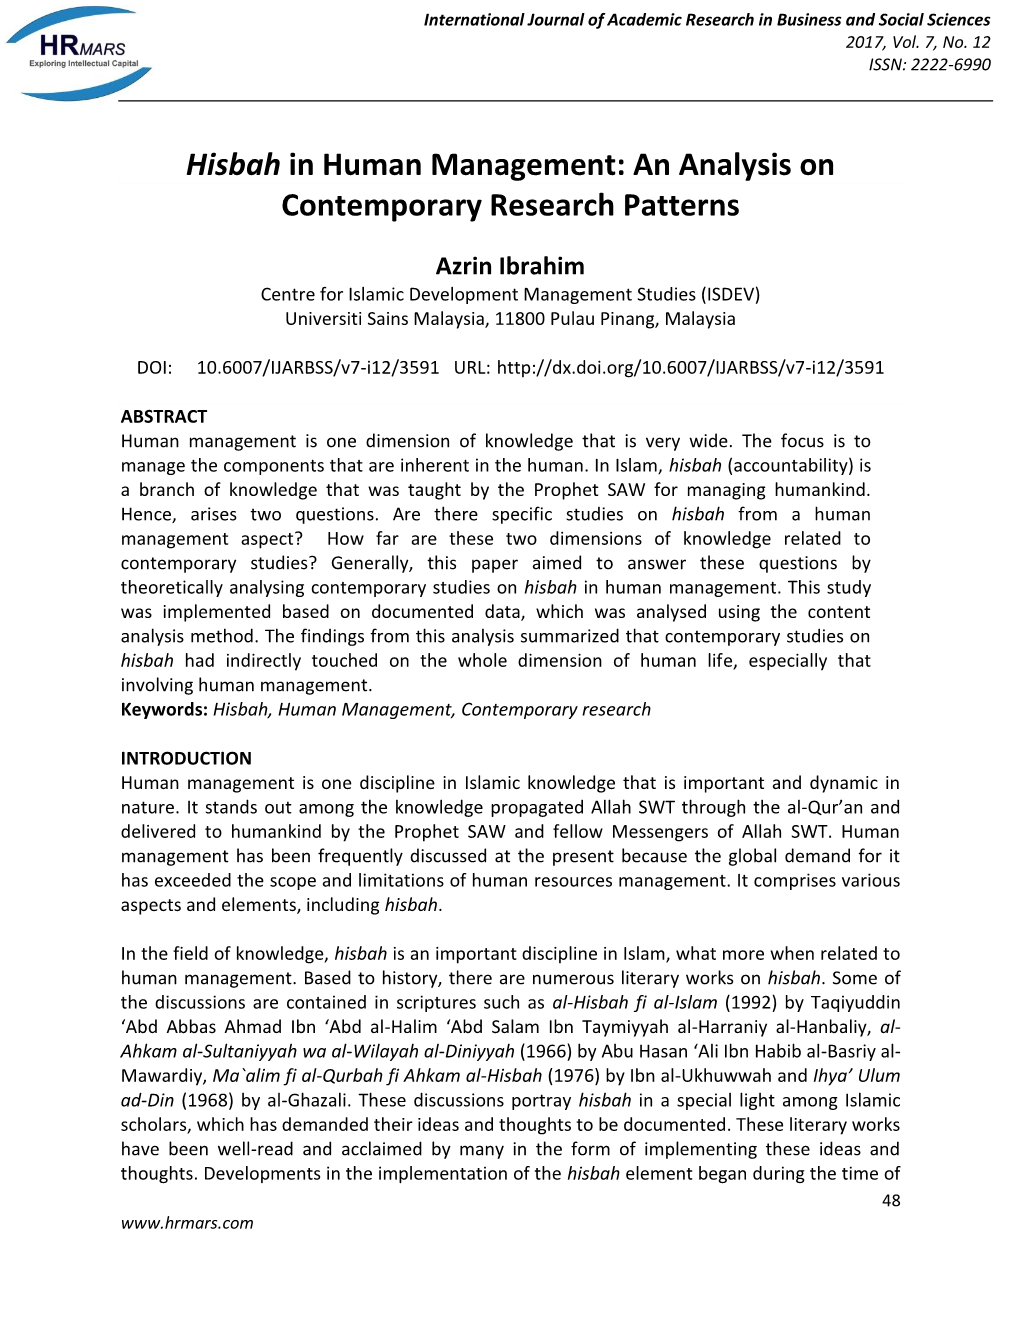 Hisbah in Human Management: an Analysis on Contemporary Research Patterns